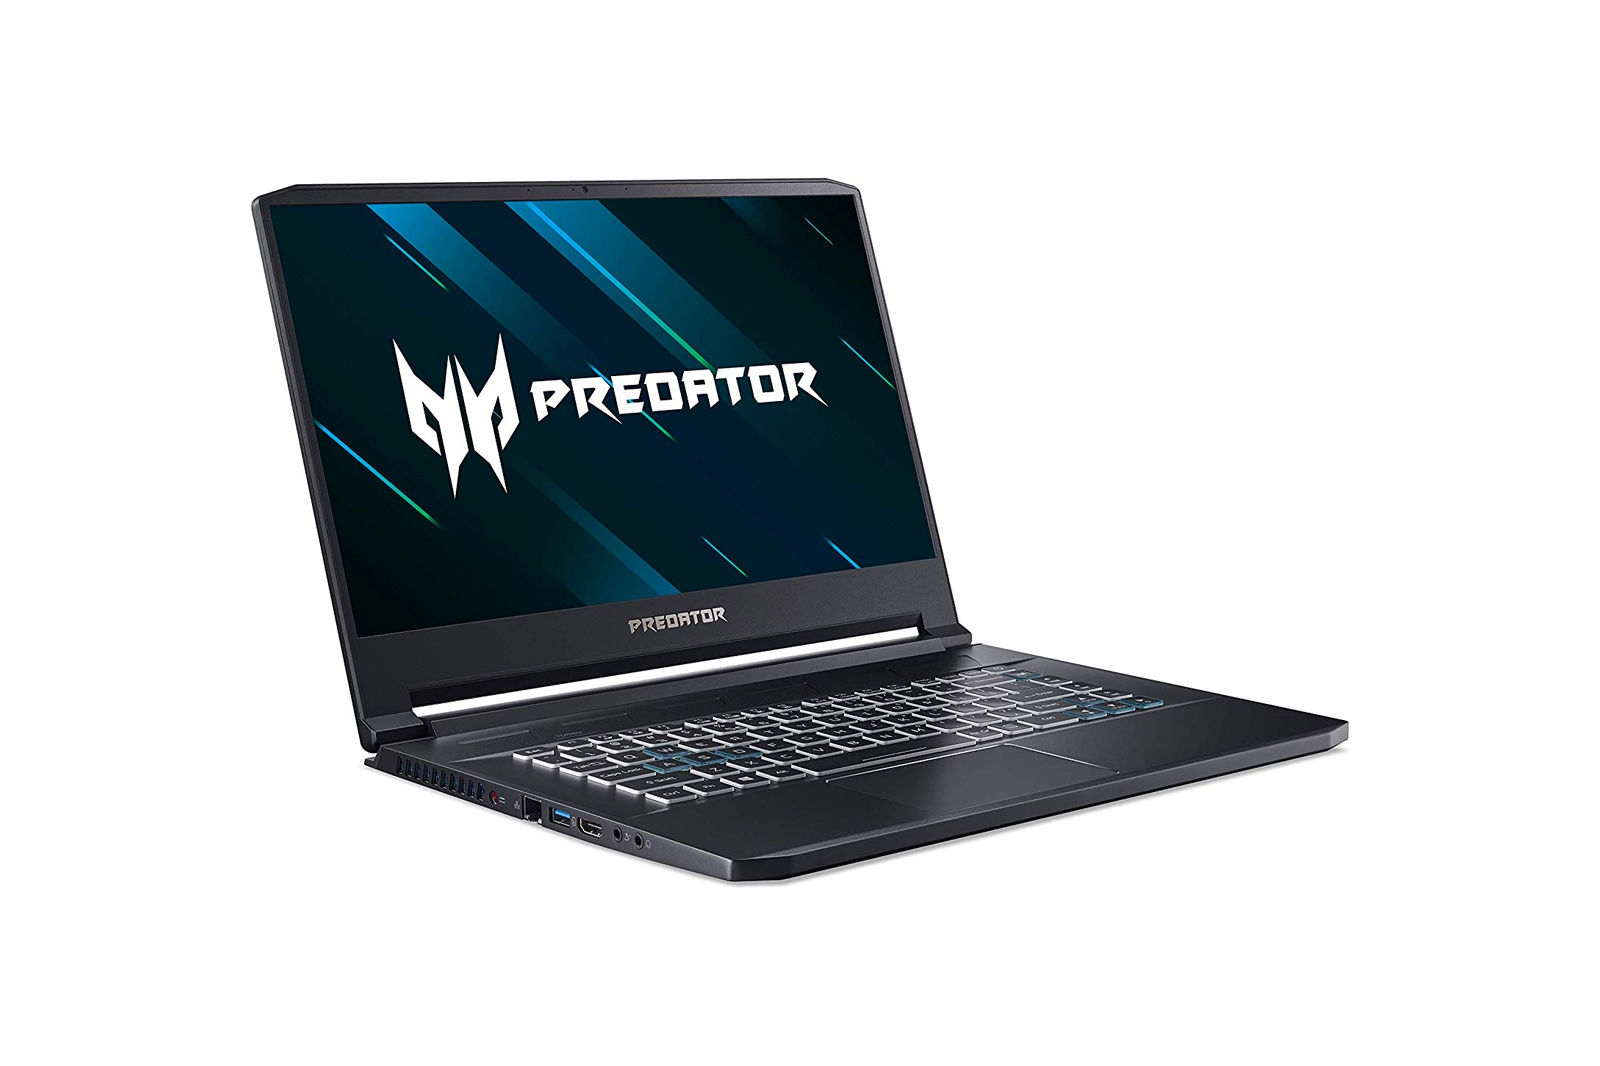 Wirecutter's best deals: Save $250 on an Acer Predator Triton gaming laptop | DeviceDaily.com